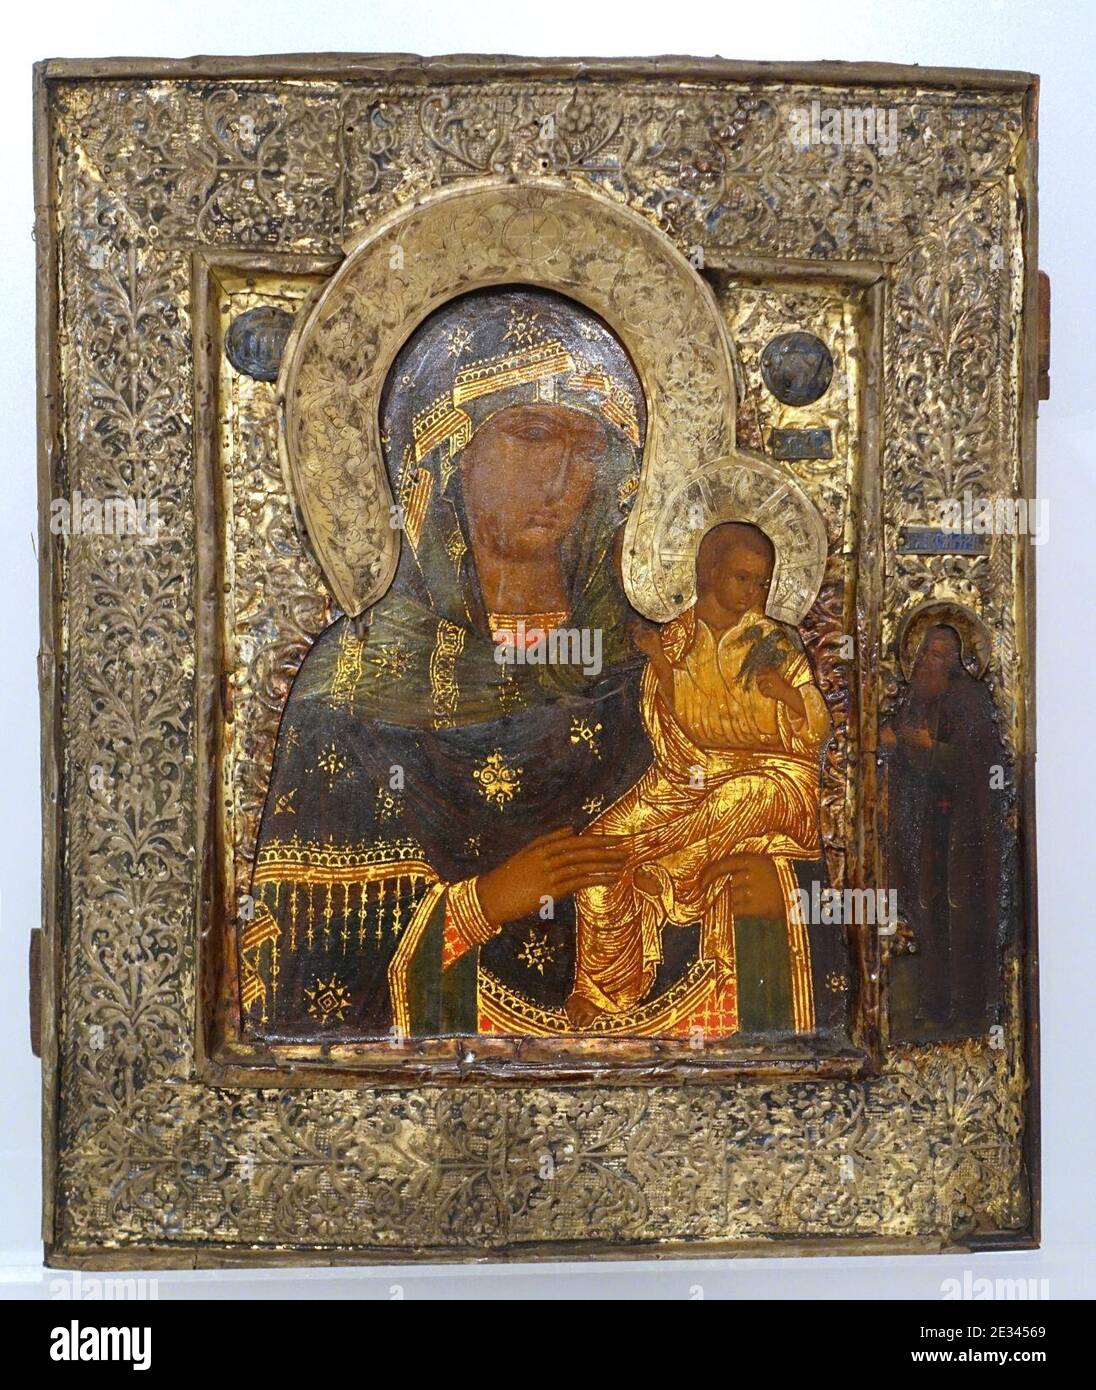 Madonna and Child Holding Dove, Russia, artist unknown, late 1500s AD, tempera on panel - Stock Photo